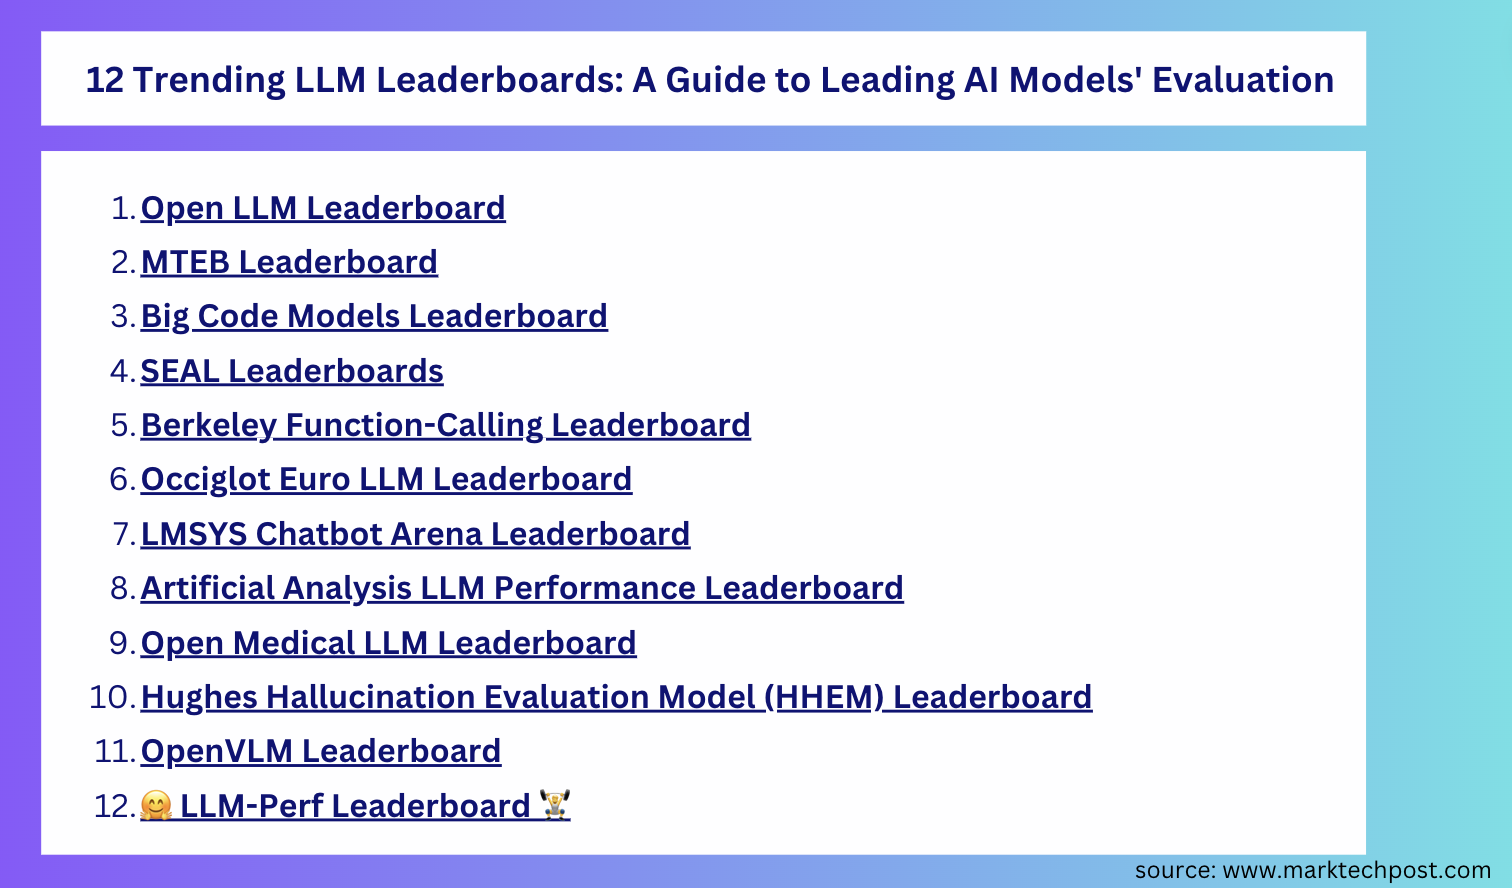  Top 12 Trending LLM Leaderboards: A Guide to Leading AI Models’ Evaluation